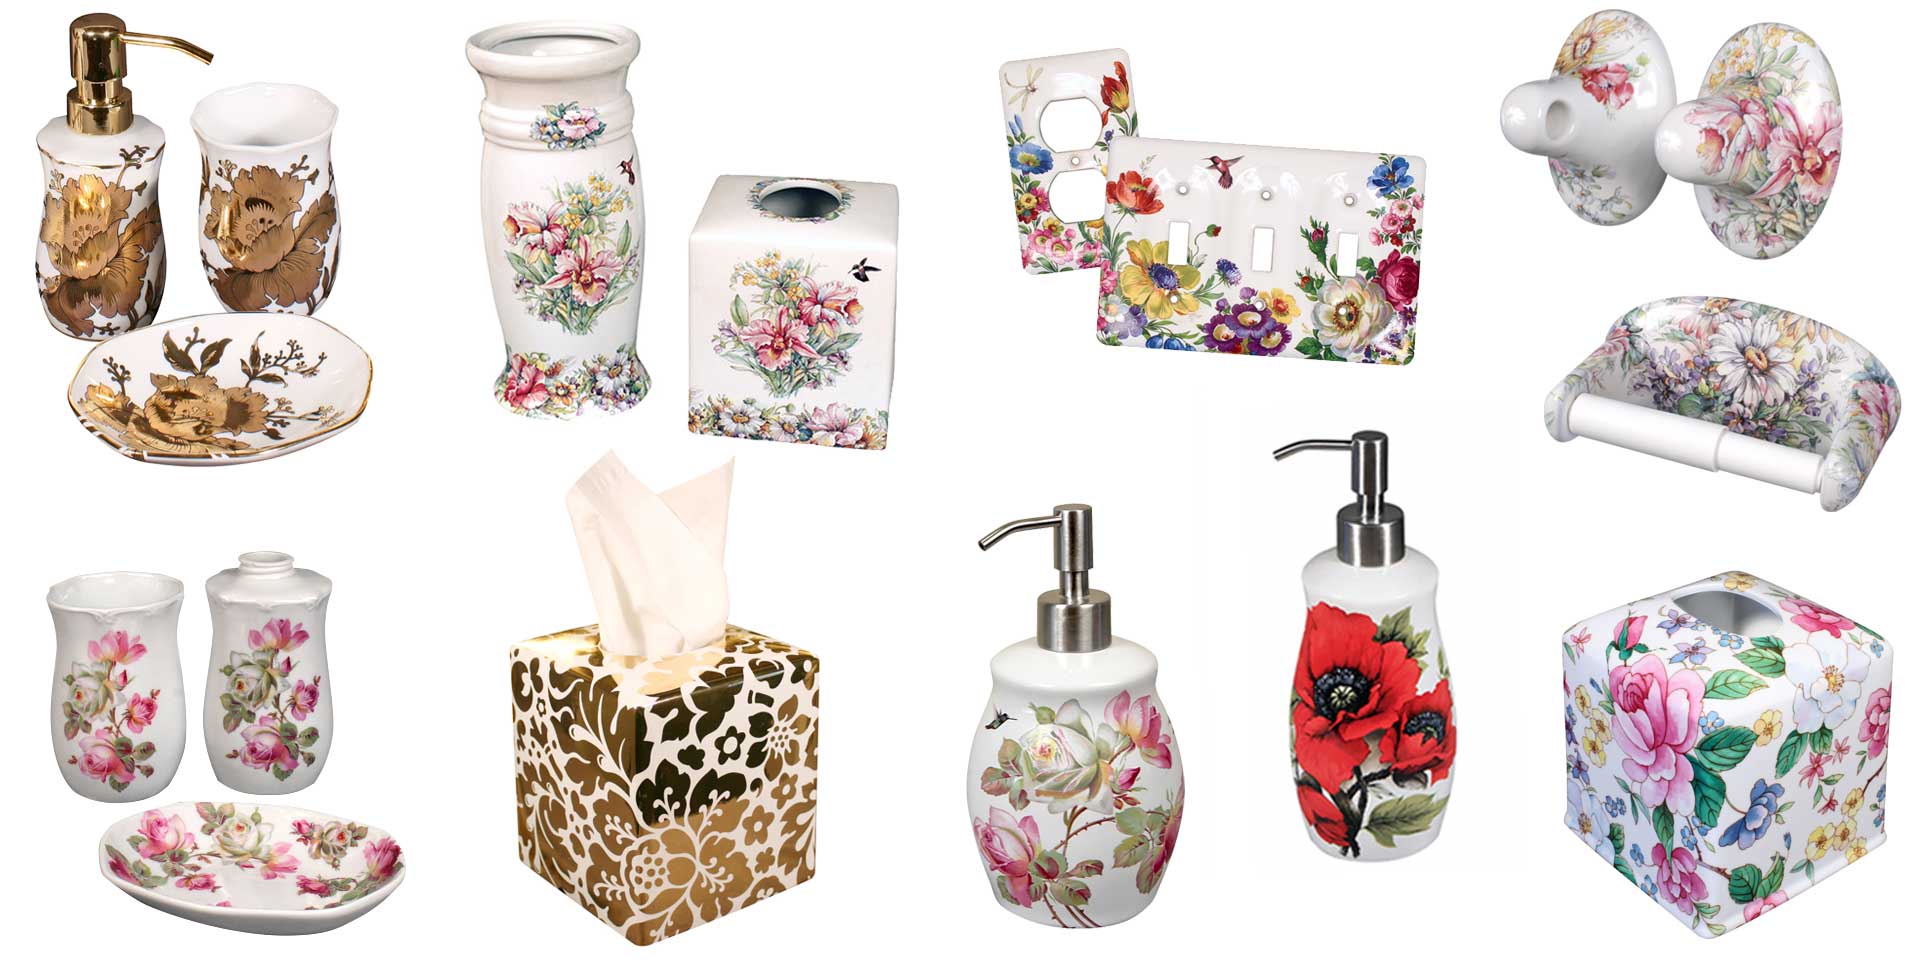 hand-painted porcelain bathroom accessories by decorated bathroom company